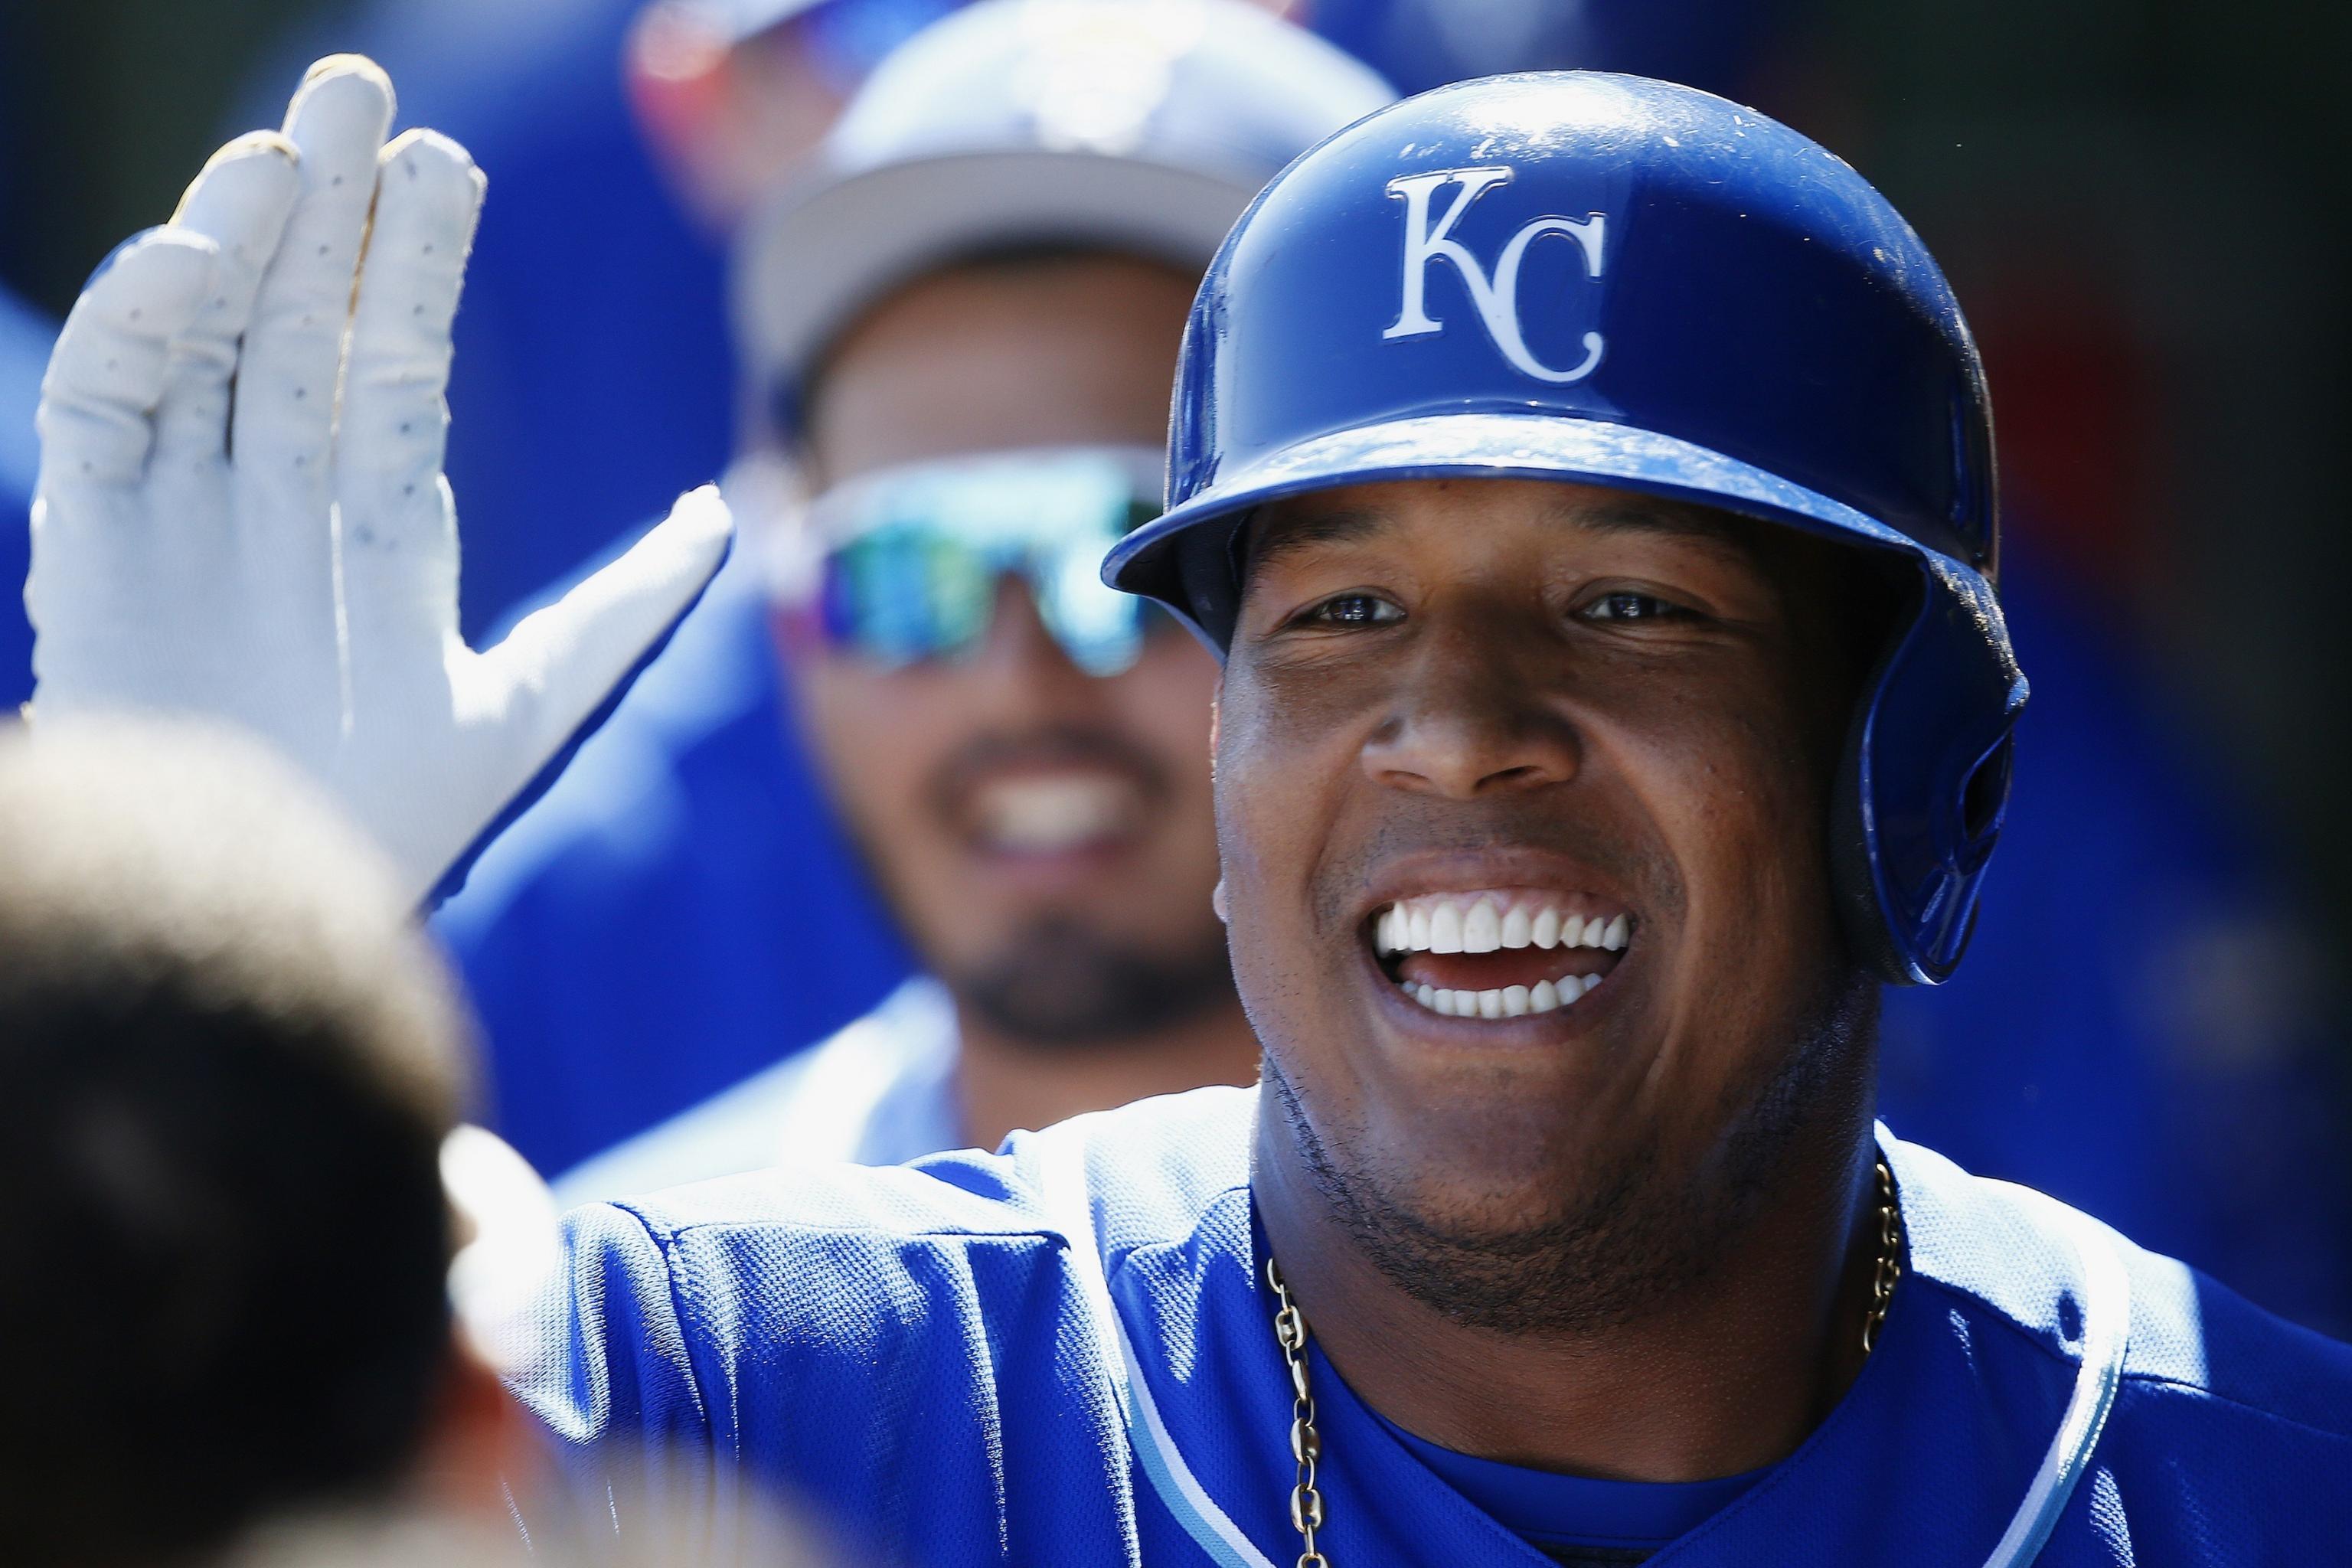 Royals-Brewers: Salvador Perez scratched for blurry vision